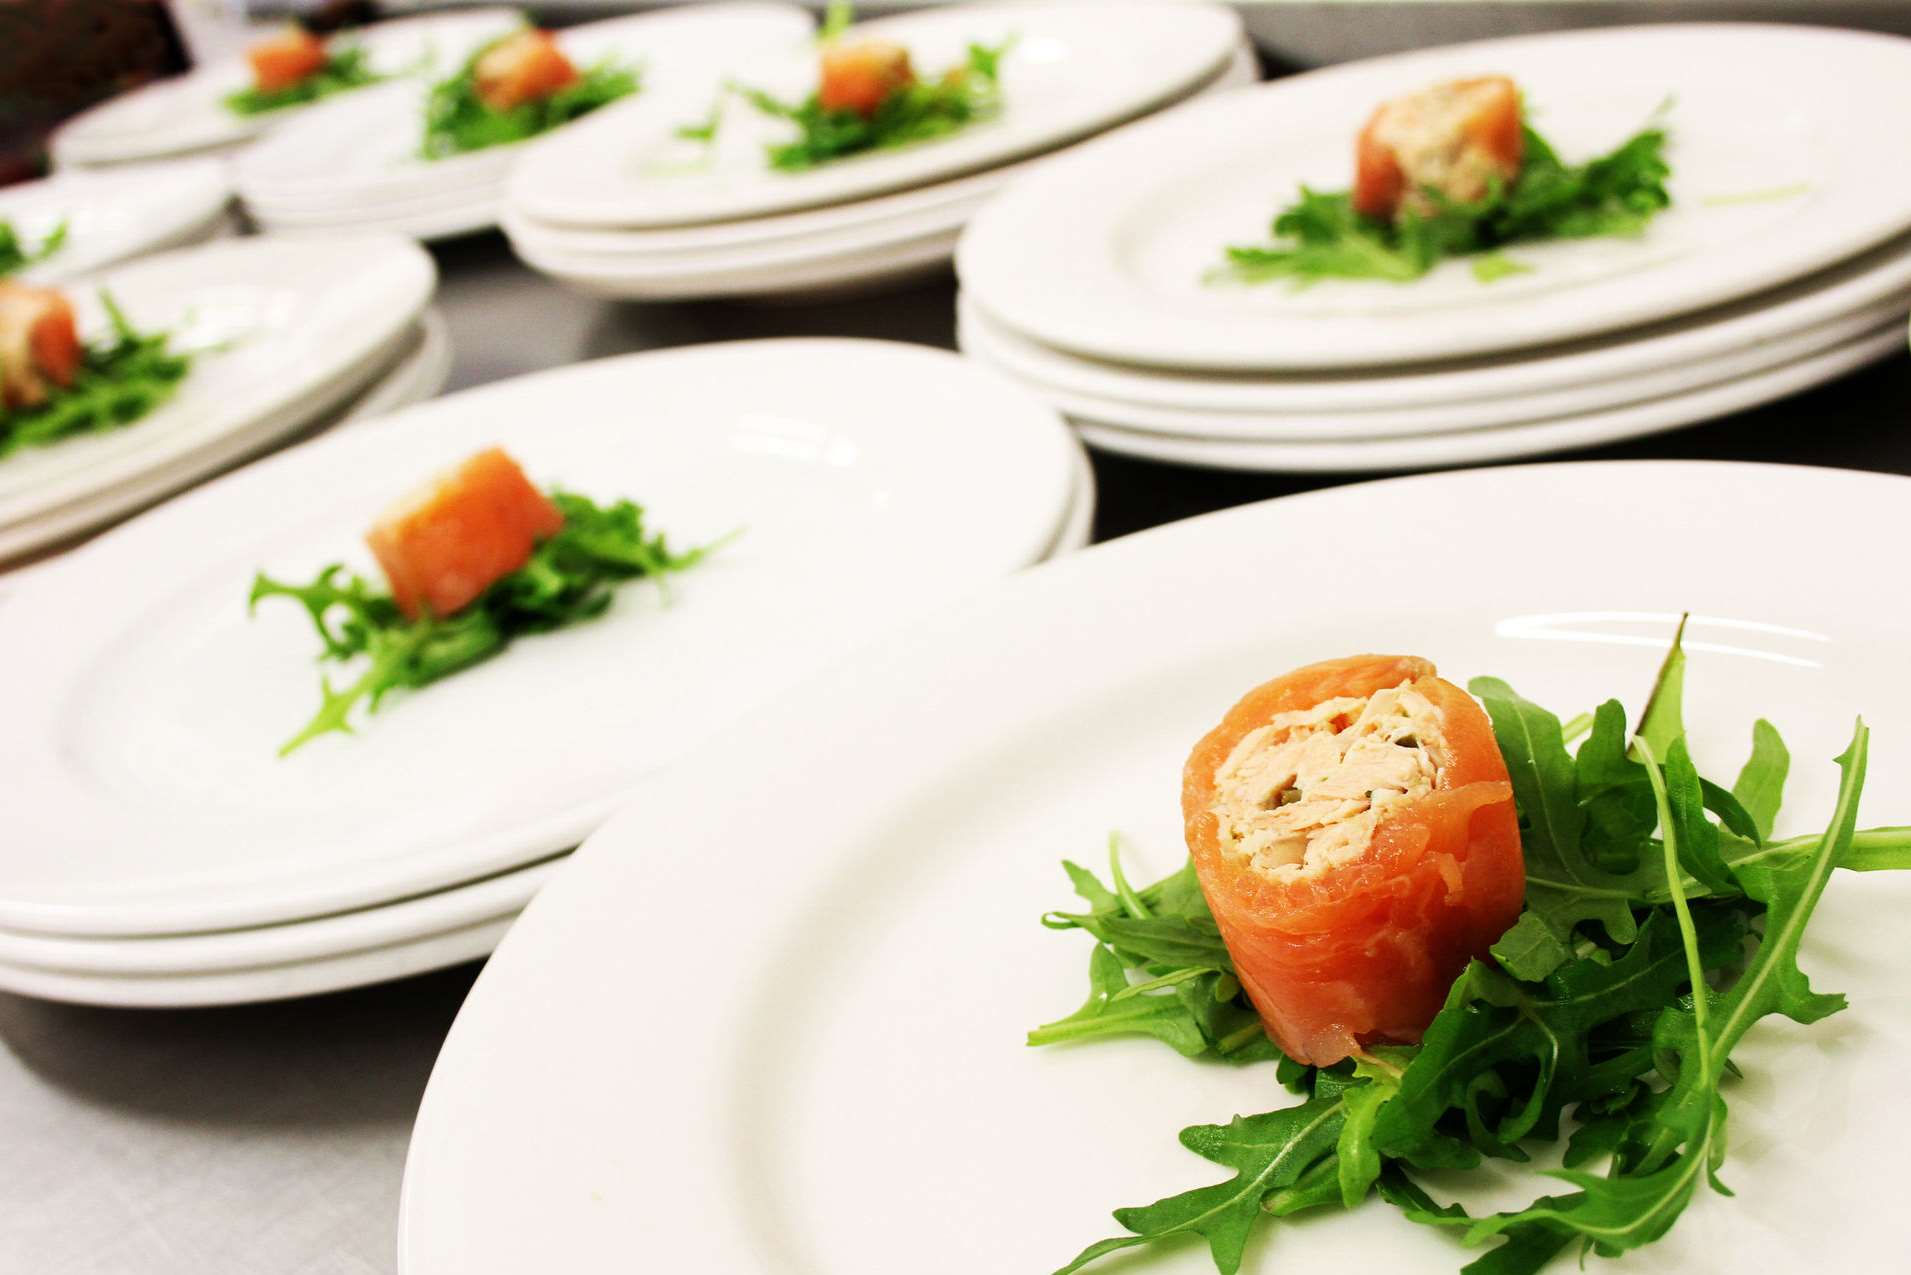 Smoked salmon roulades - small portions ruled in the Nineties